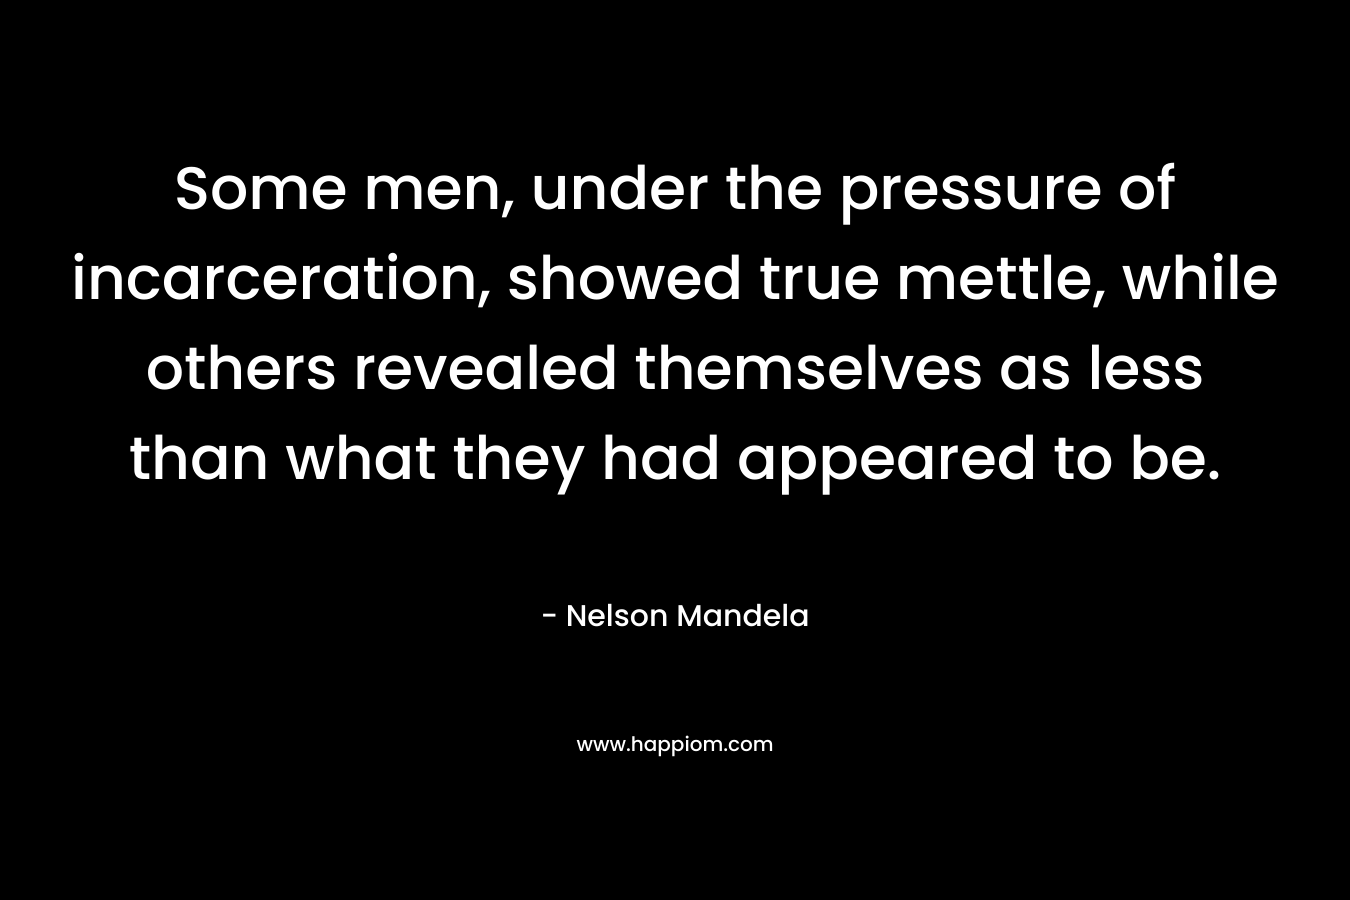 Some men, under the pressure of incarceration, showed true mettle, while others revealed themselves as less than what they had appeared to be. – Nelson Mandela